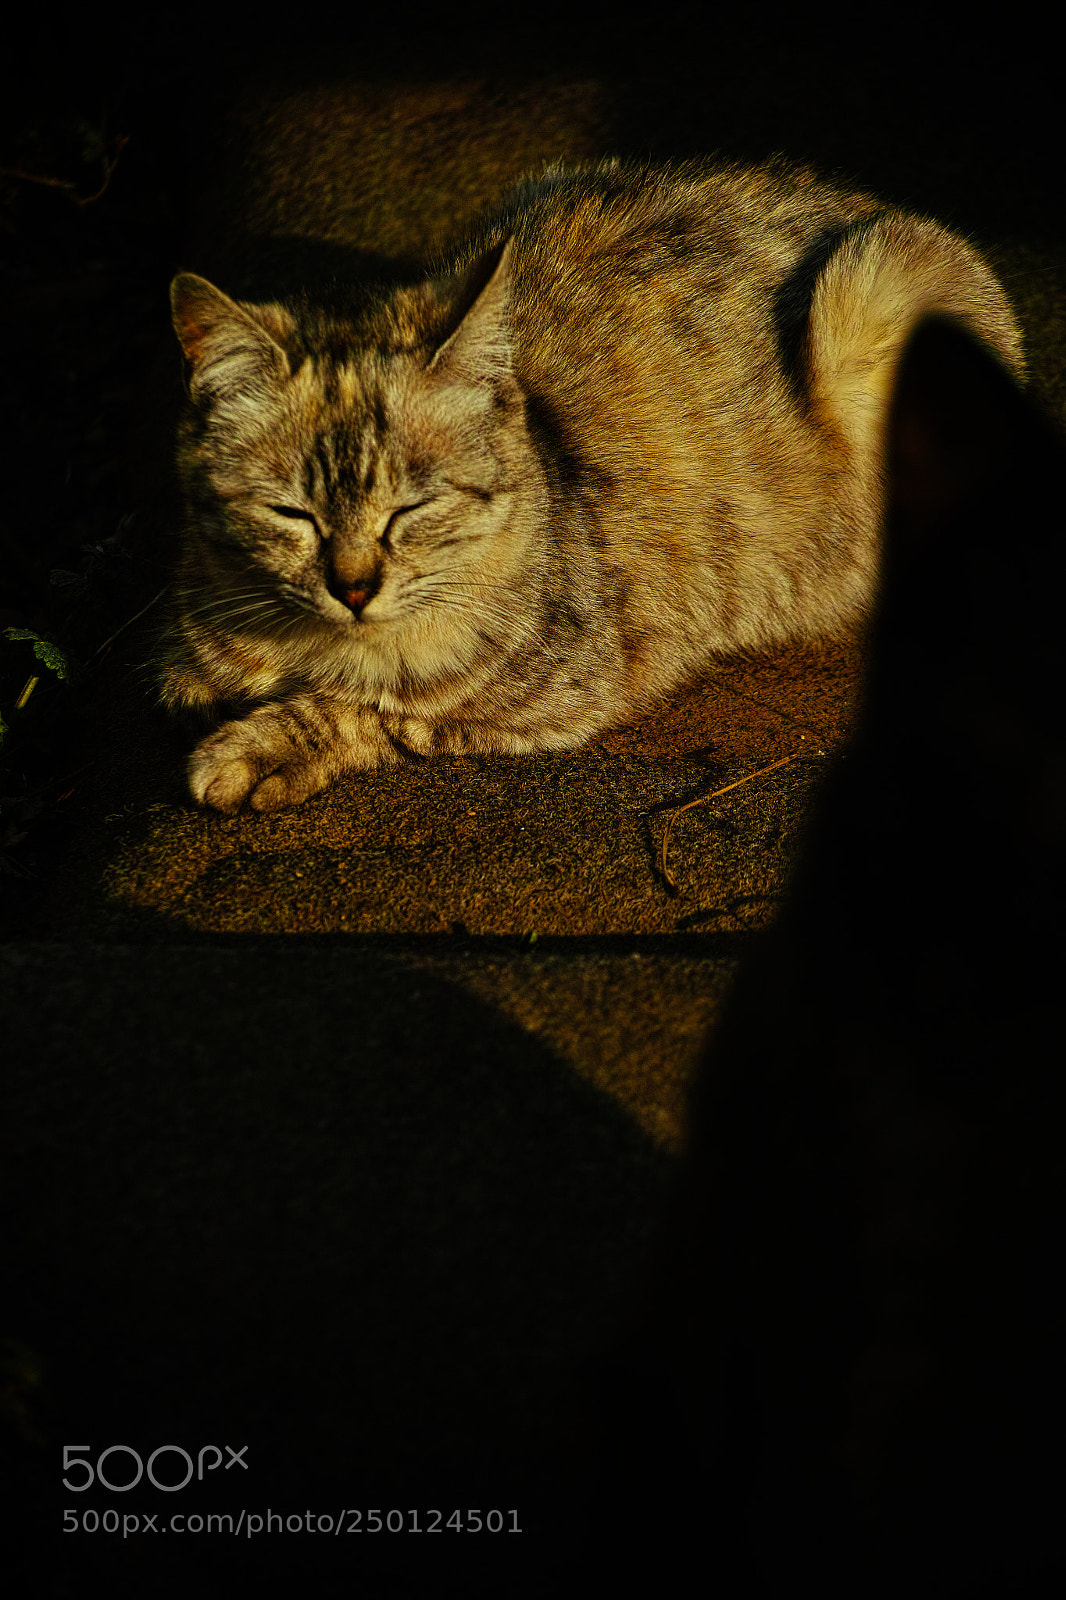 Sigma DP3 Merrill sample photo. Cat every day photography